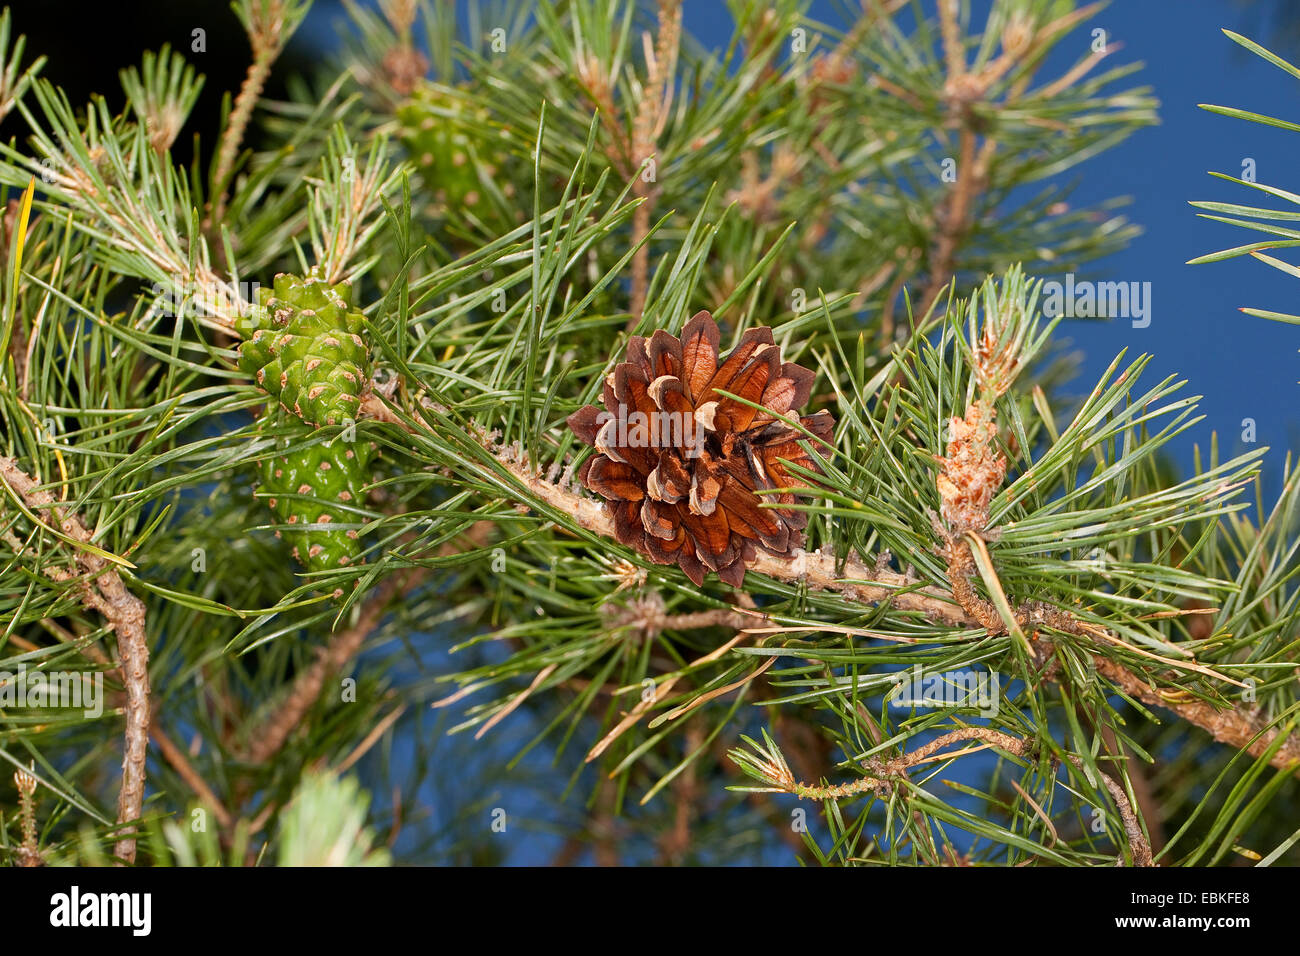 Scotch pine, scots pine (Pinus sylvestris), branch with yung and old cone, Germany Stock Photo